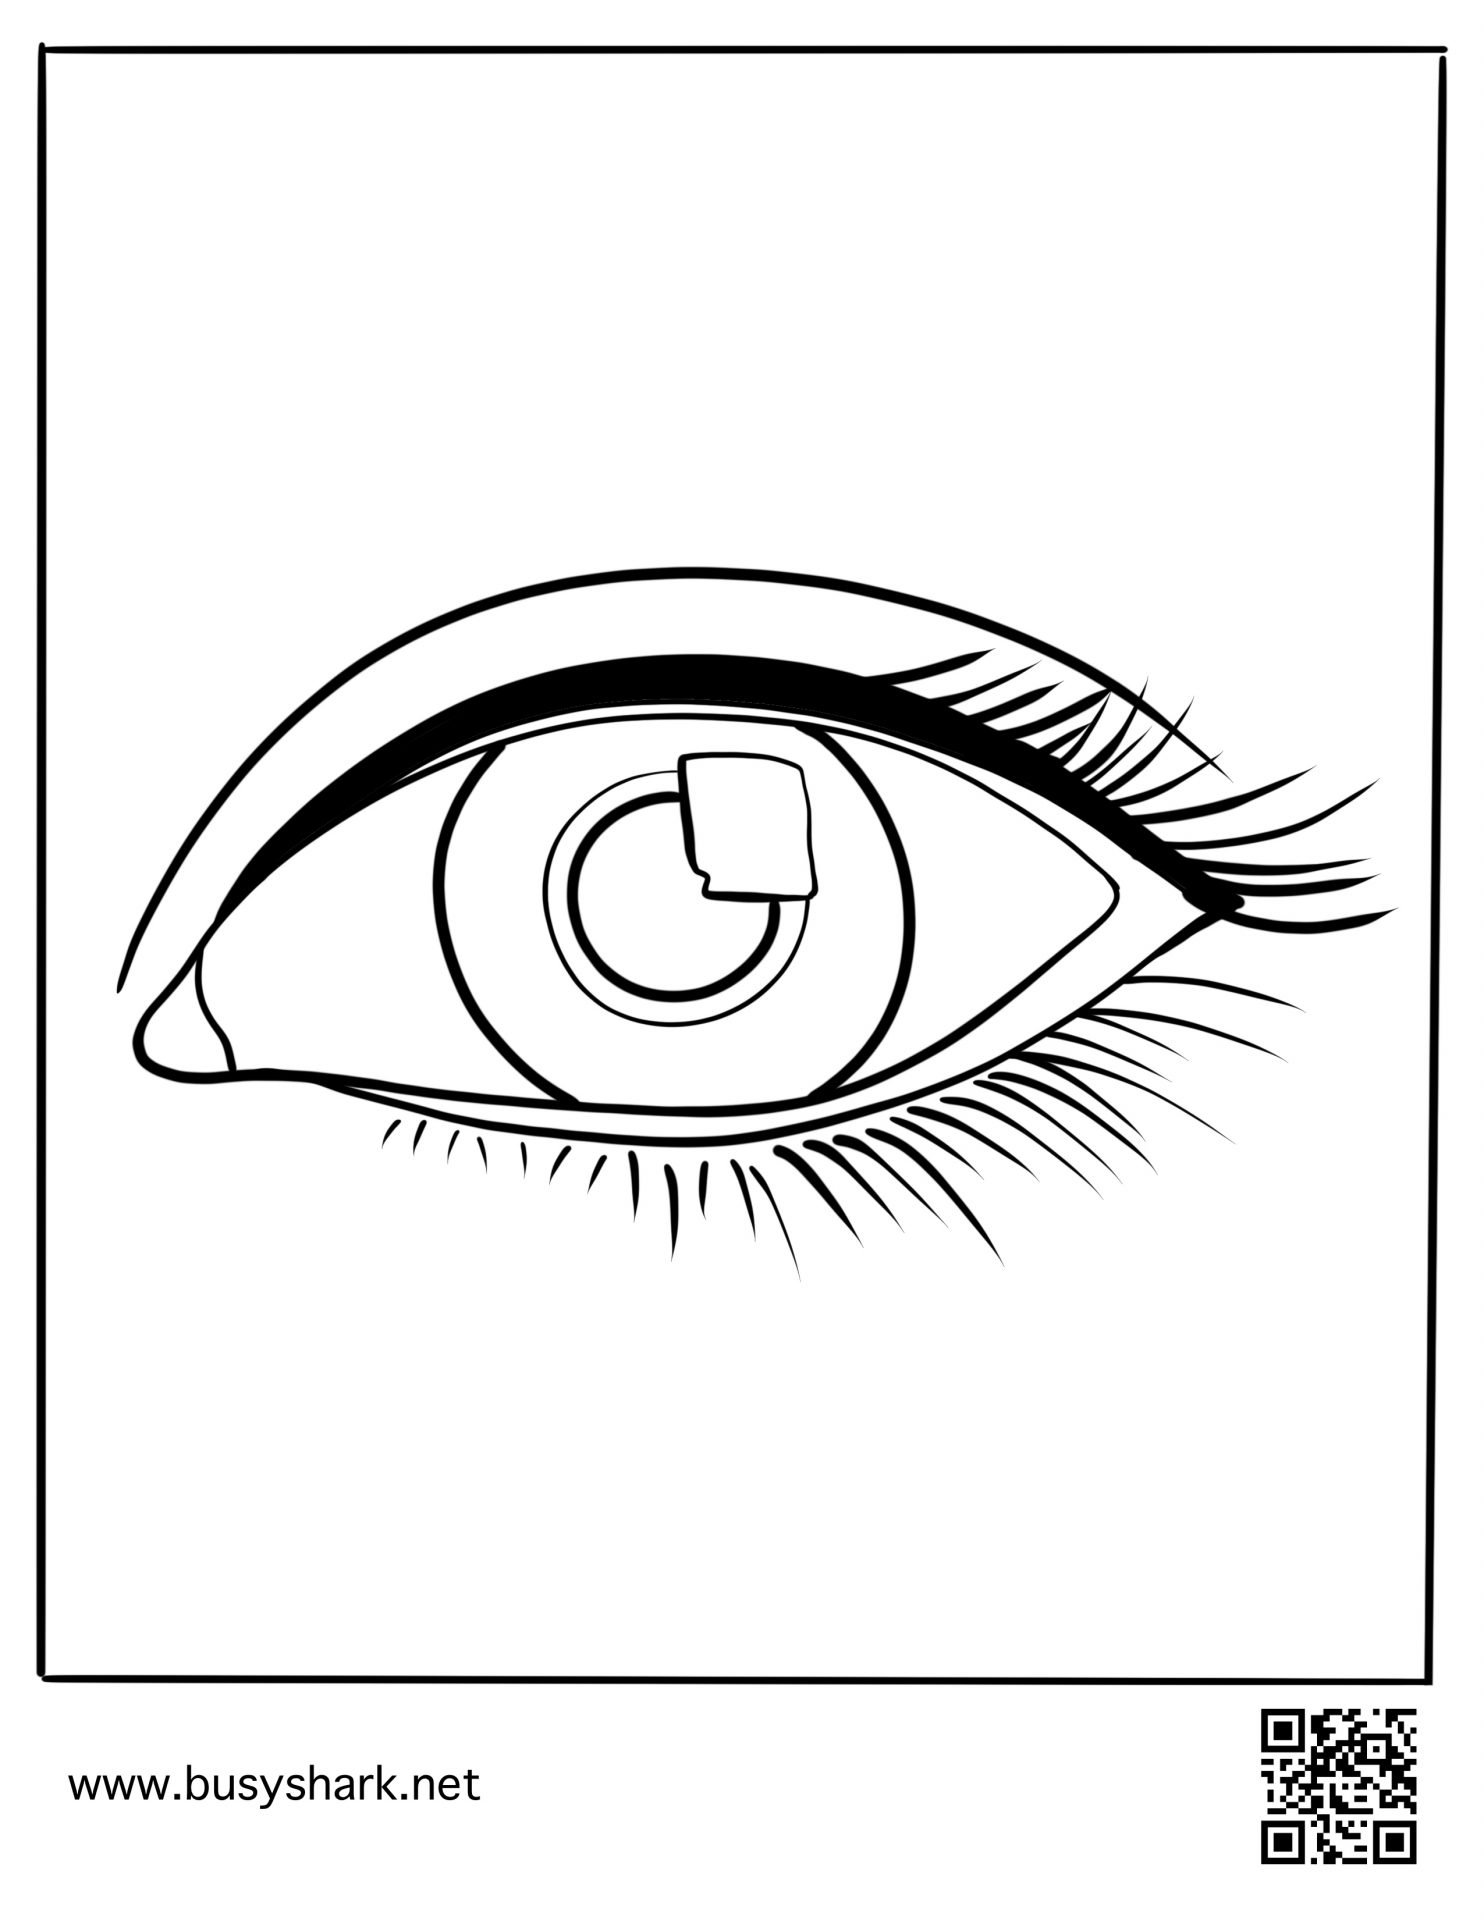 Free female eye coloring page